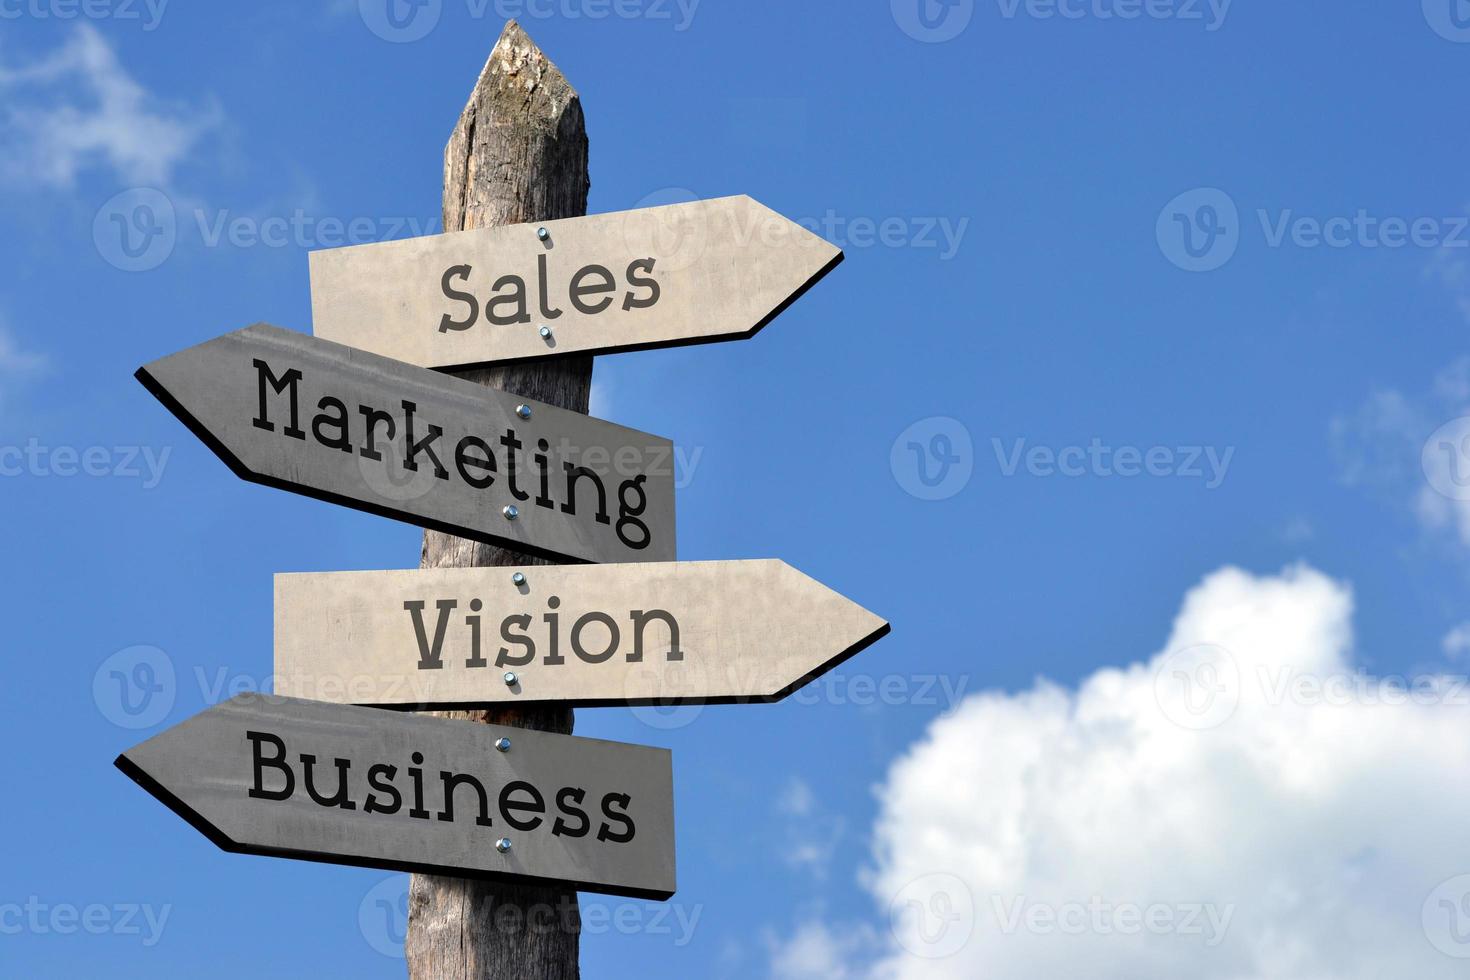 Sales, Marketing, Vision, Business - Wooden Signpost with Four Arrows, Sky with Clouds photo